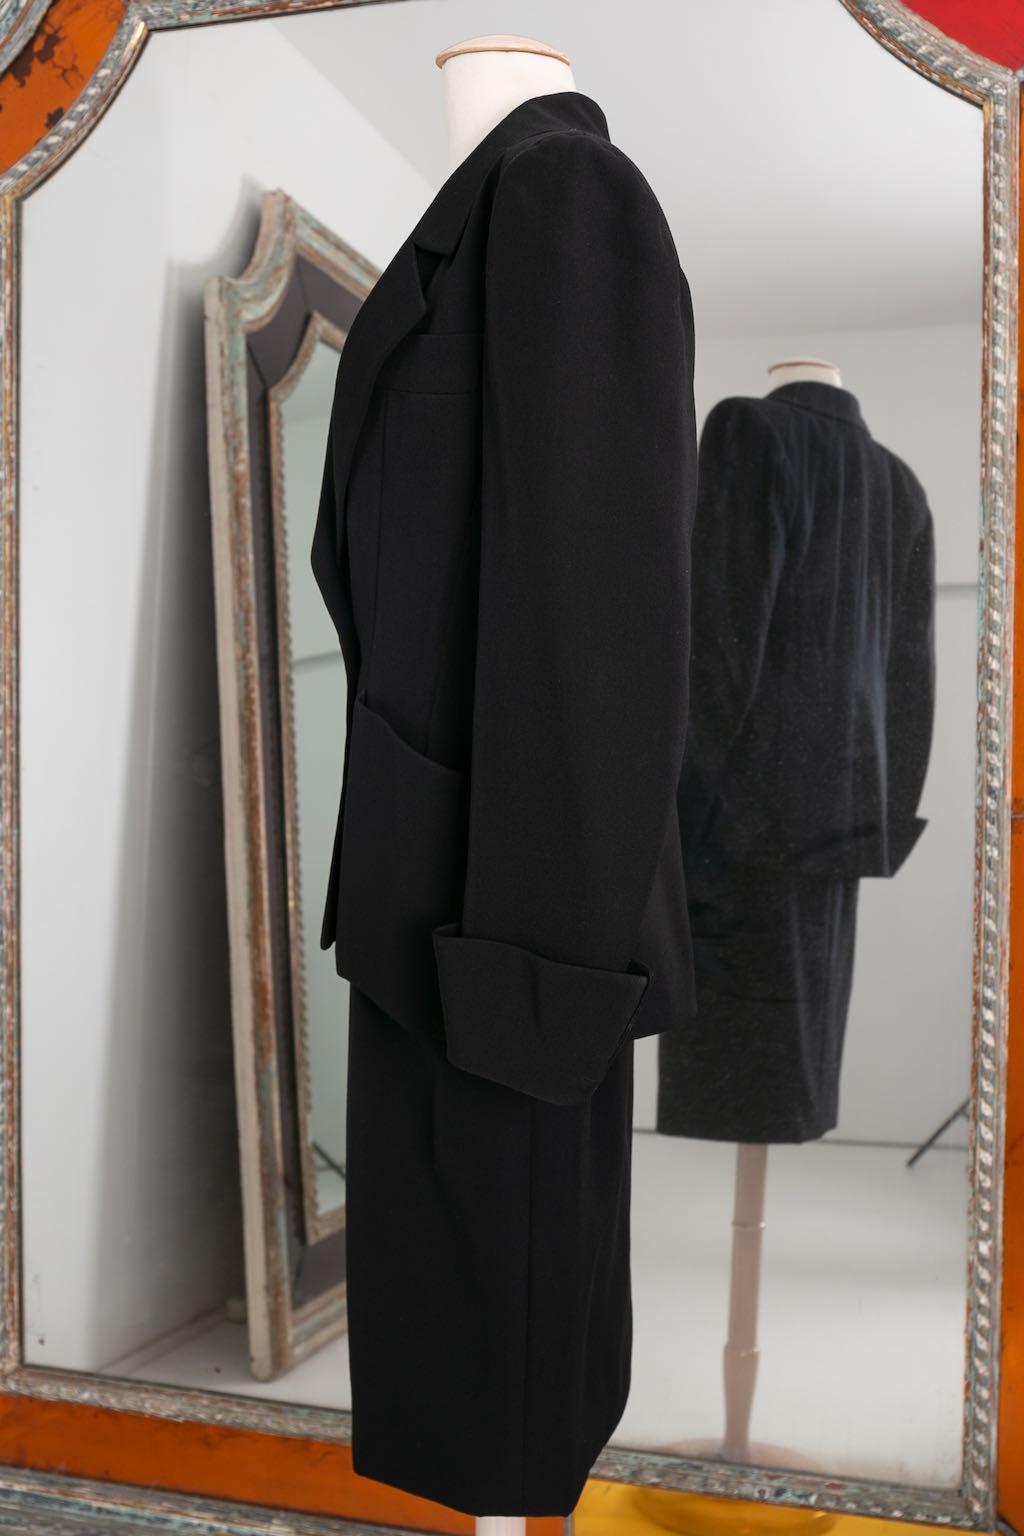 Yves Saint Laurent Haute Couture Black Skirt and Jacket Set, circa 1981/1982 For Sale 13